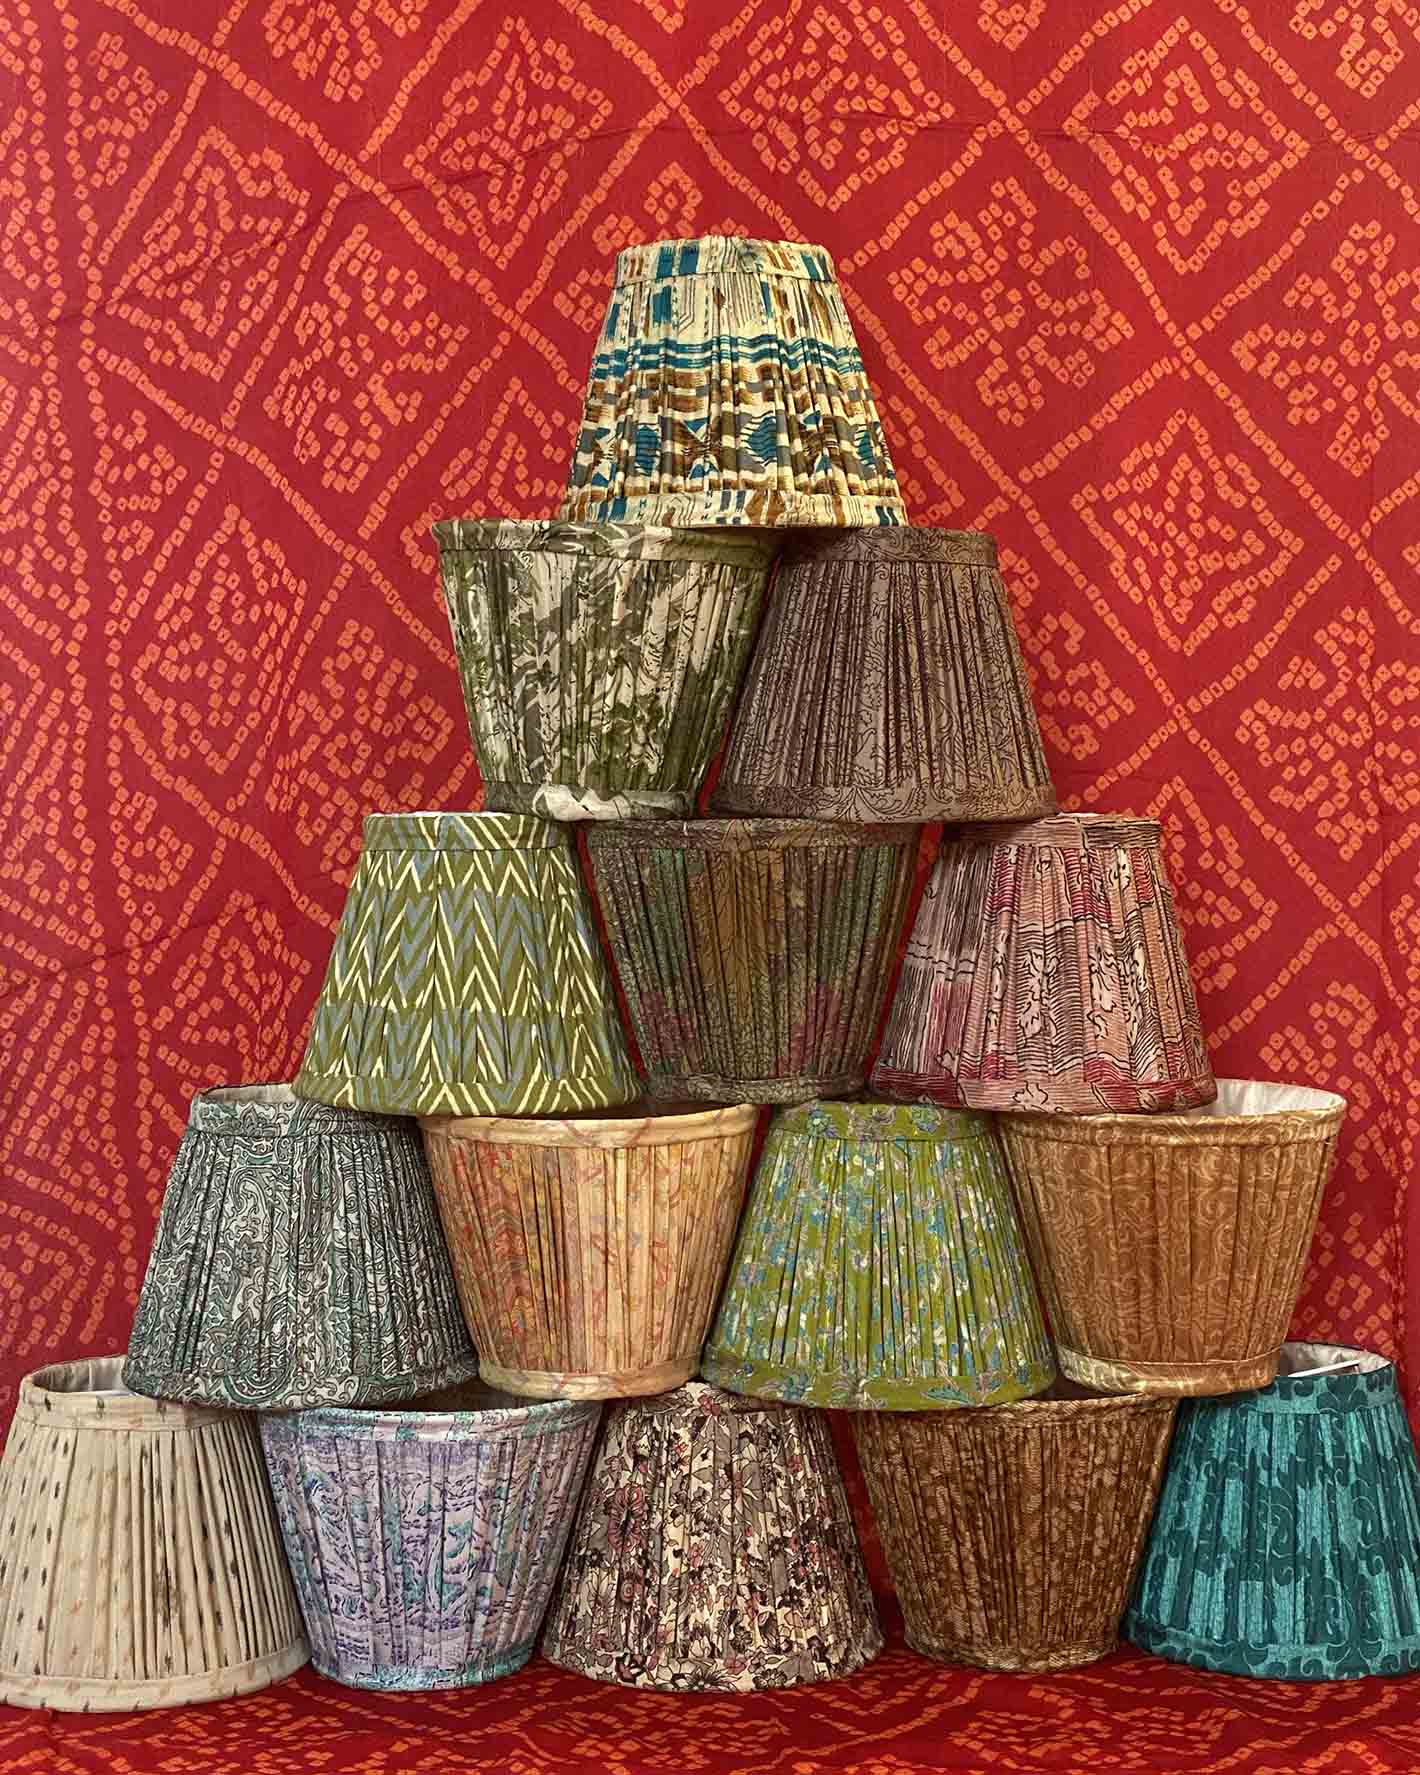 15cm lampshade tower against a red sari background